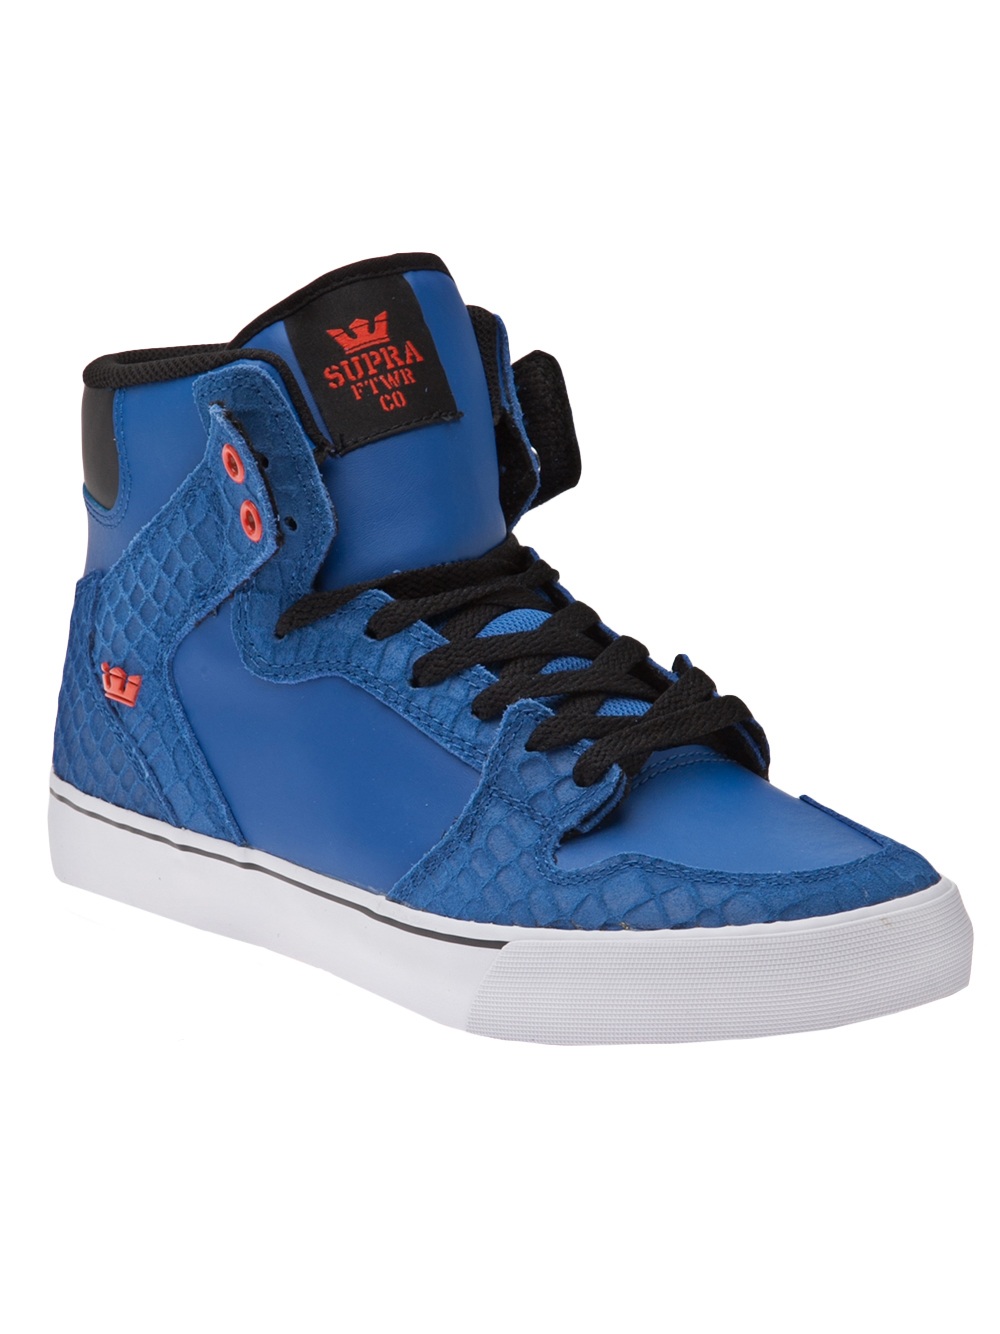 Supra High Tops in Blue (Gray) for Men - Lyst